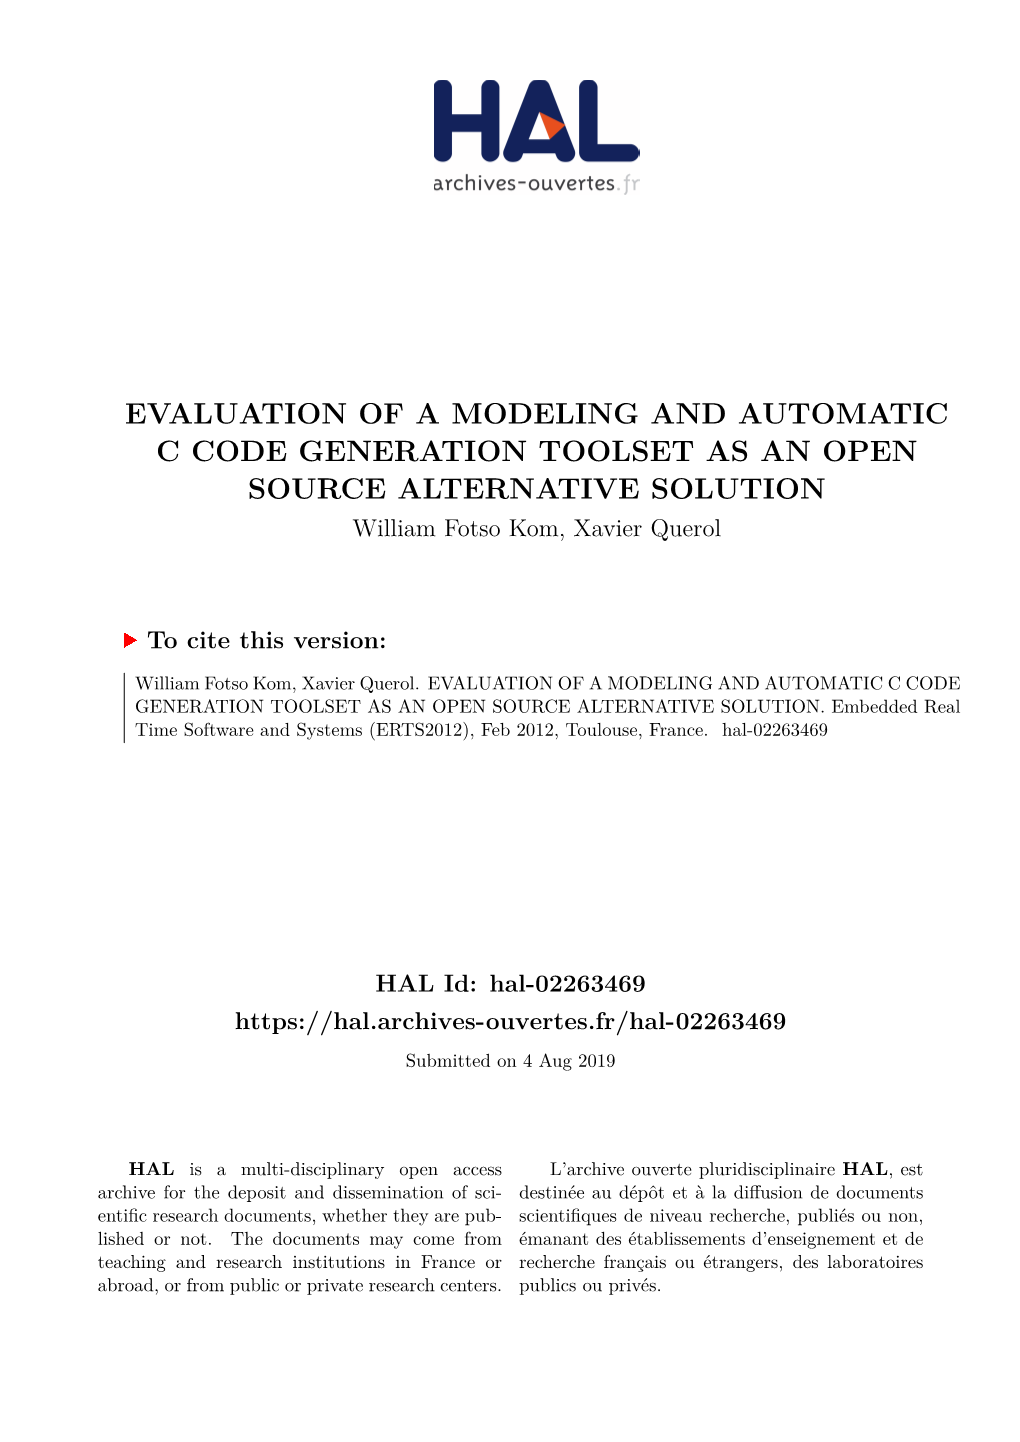 EVALUATION of a MODELING and AUTOMATIC C CODE GENERATION TOOLSET AS an OPEN SOURCE ALTERNATIVE SOLUTION William Fotso Kom, Xavier Querol